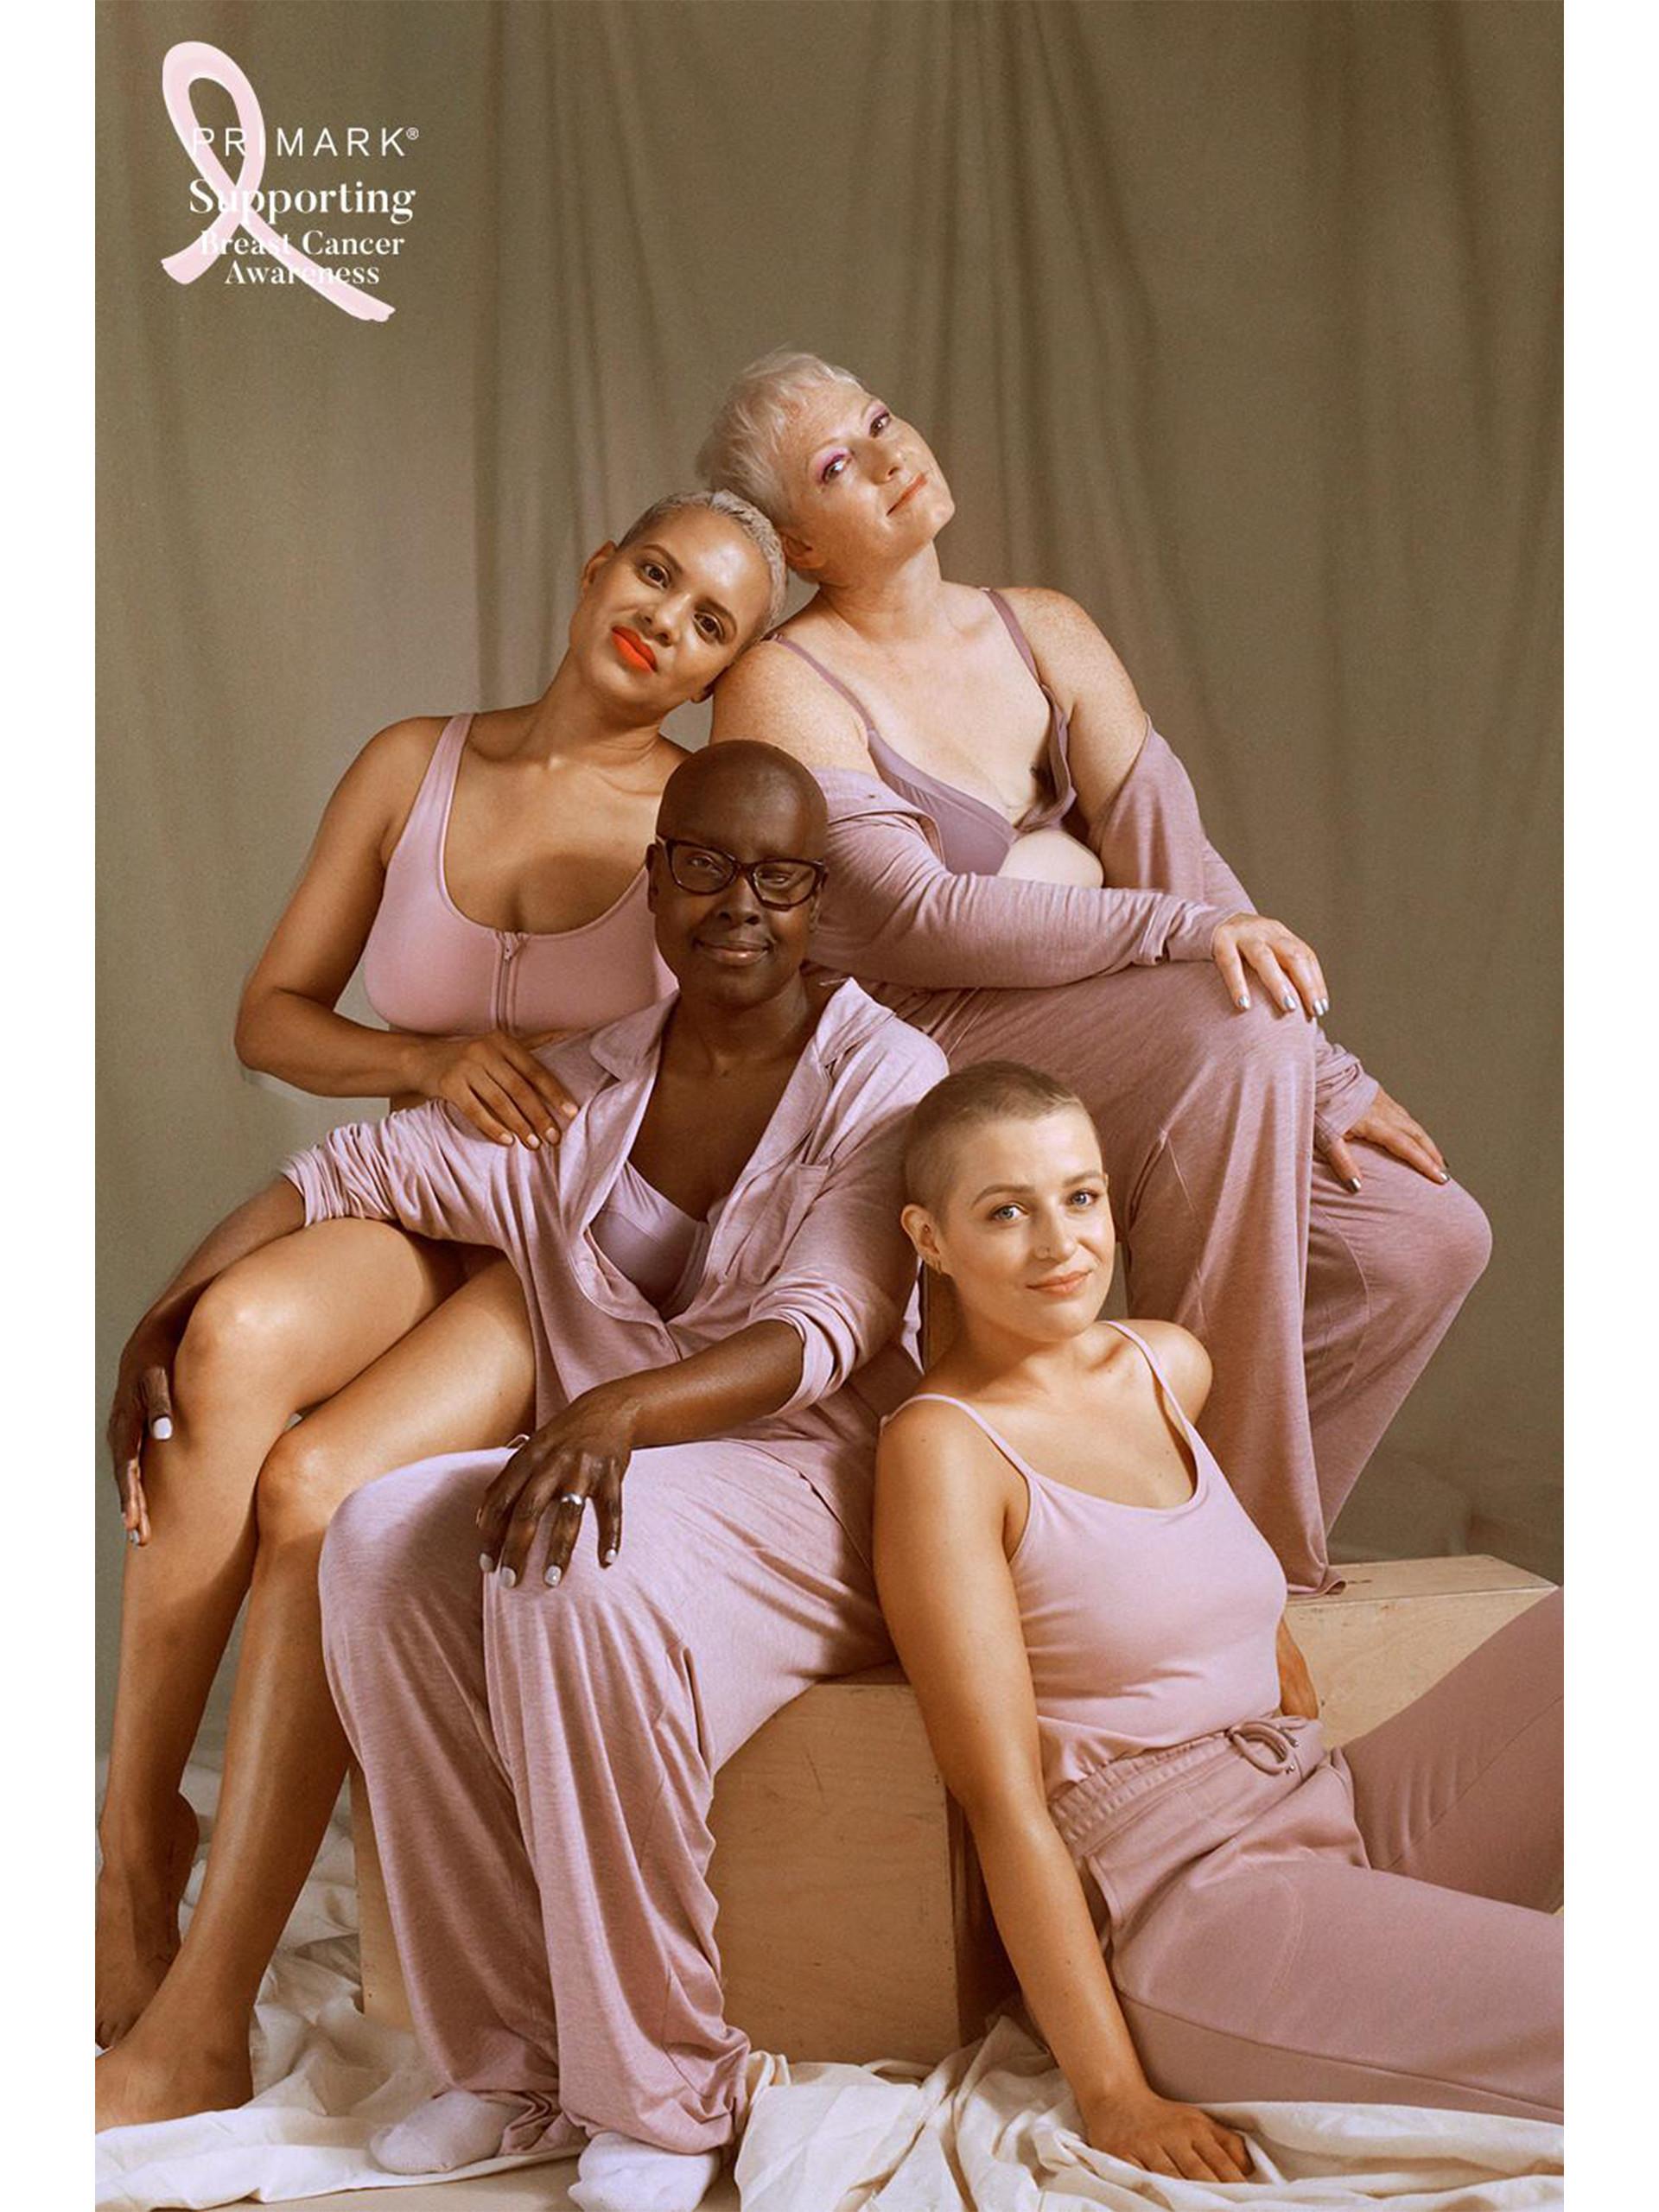 Models sat leaning on one another, smiling